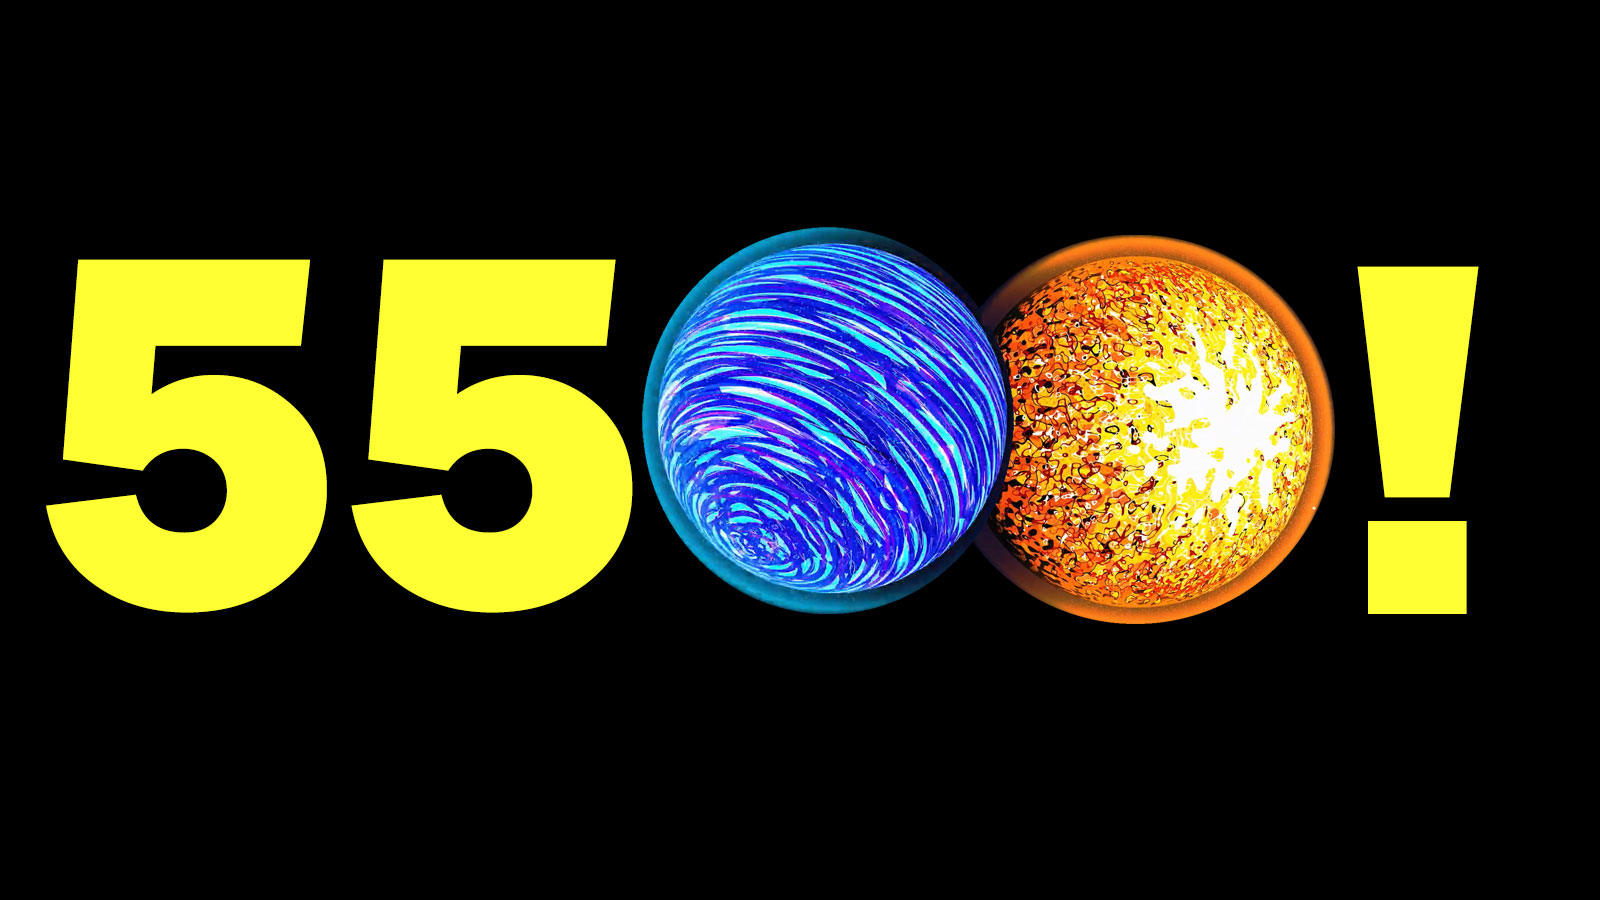 slide 2 - A graphic shows the number 5,500 with colorful exoplanet illustrations forming the zeroes of the number.